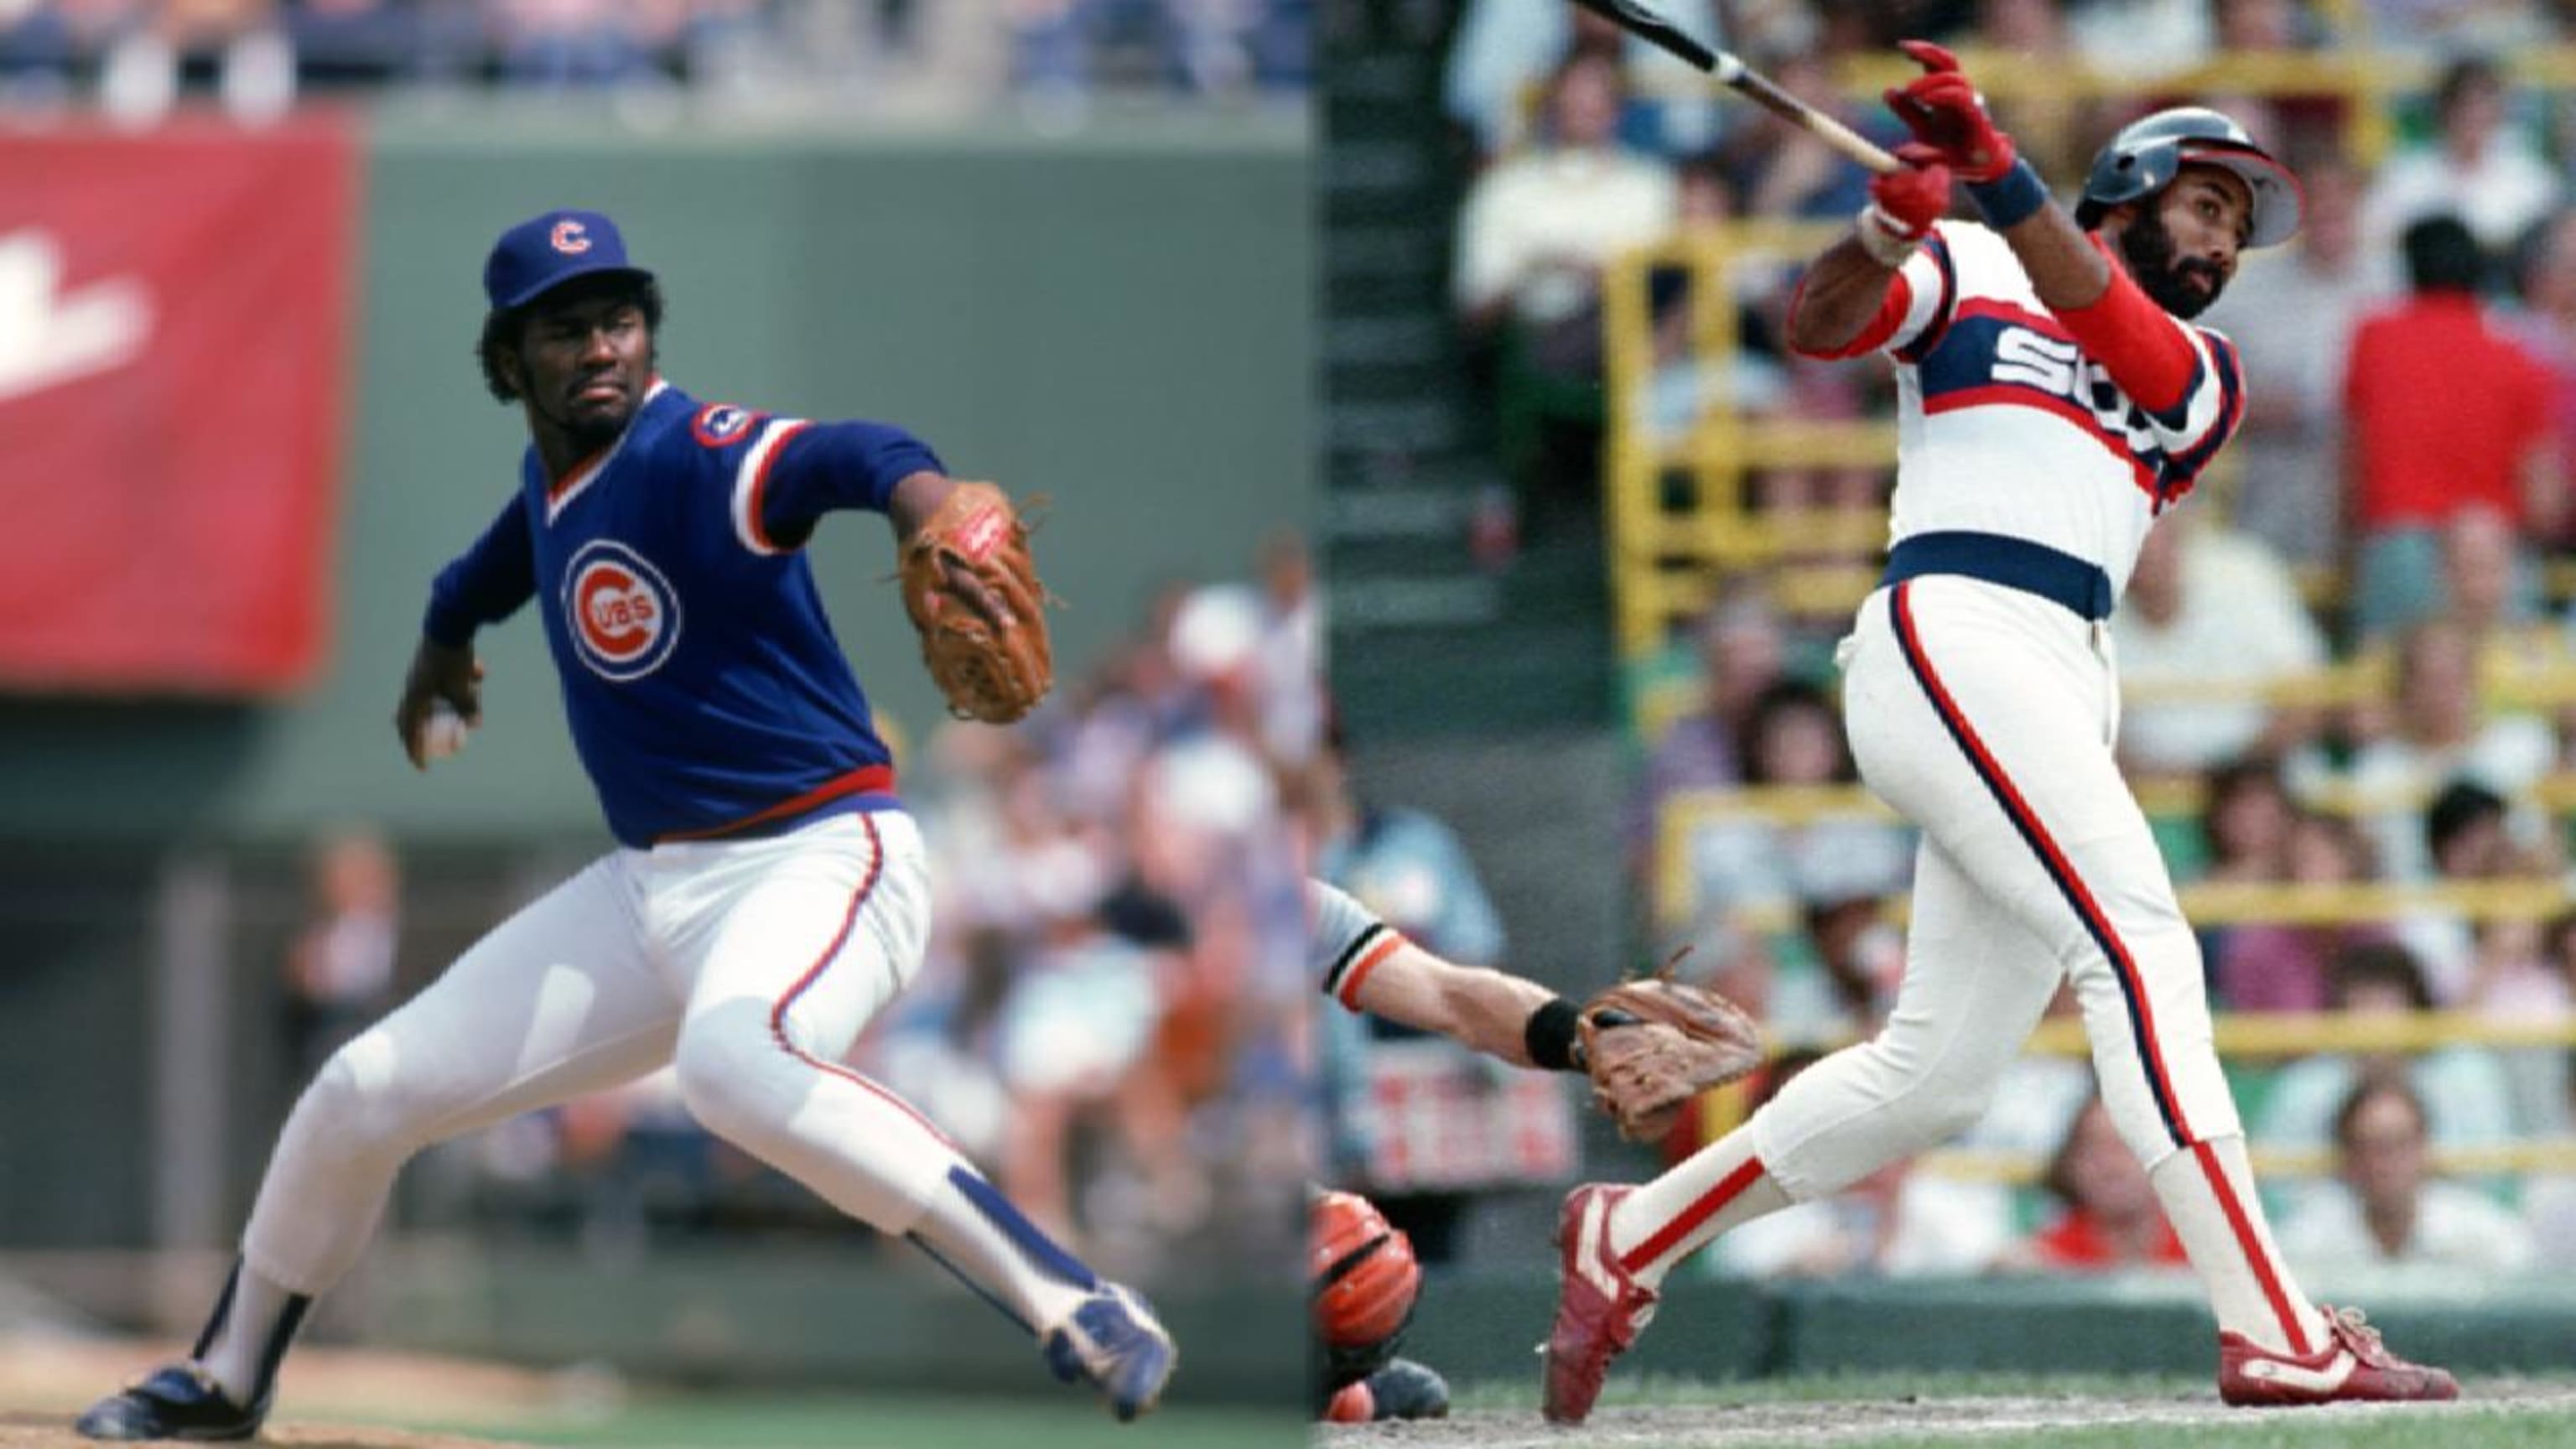 White Sox Outfielder Harold Baines, Cubs Pitcher Lee Smith Elected